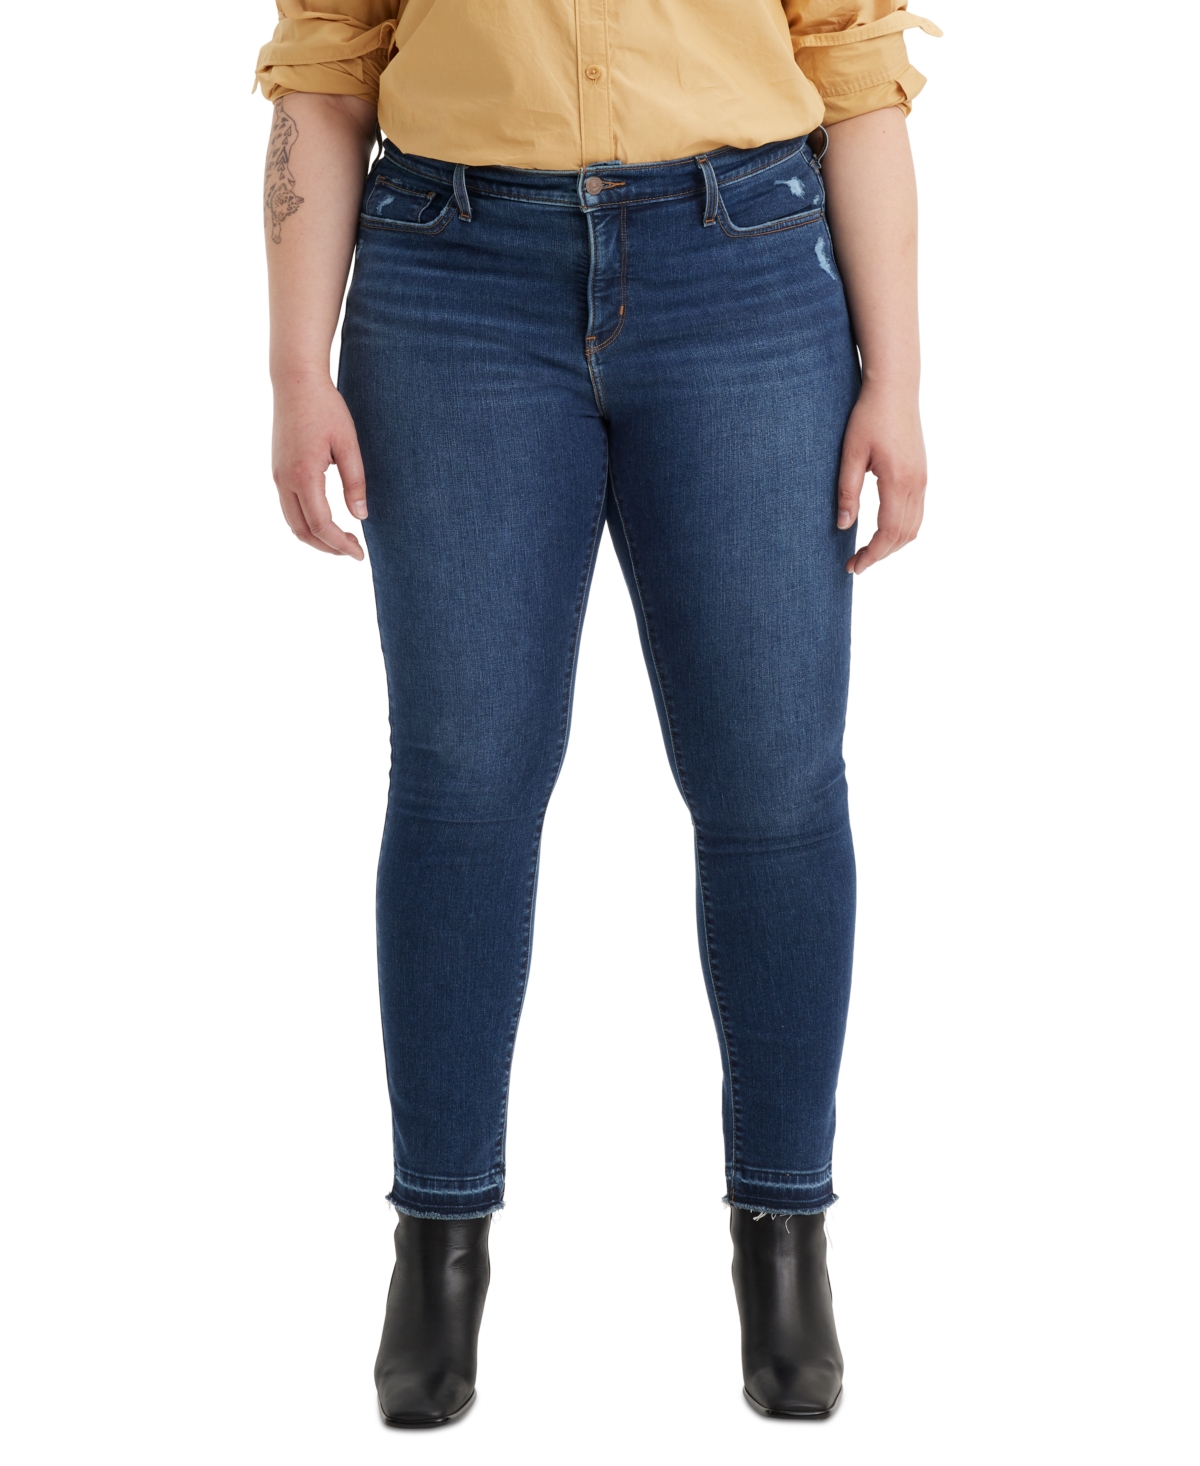 Levi's Trendy Plus Size 311 Shaping Skinny Jeans In The Best Seller